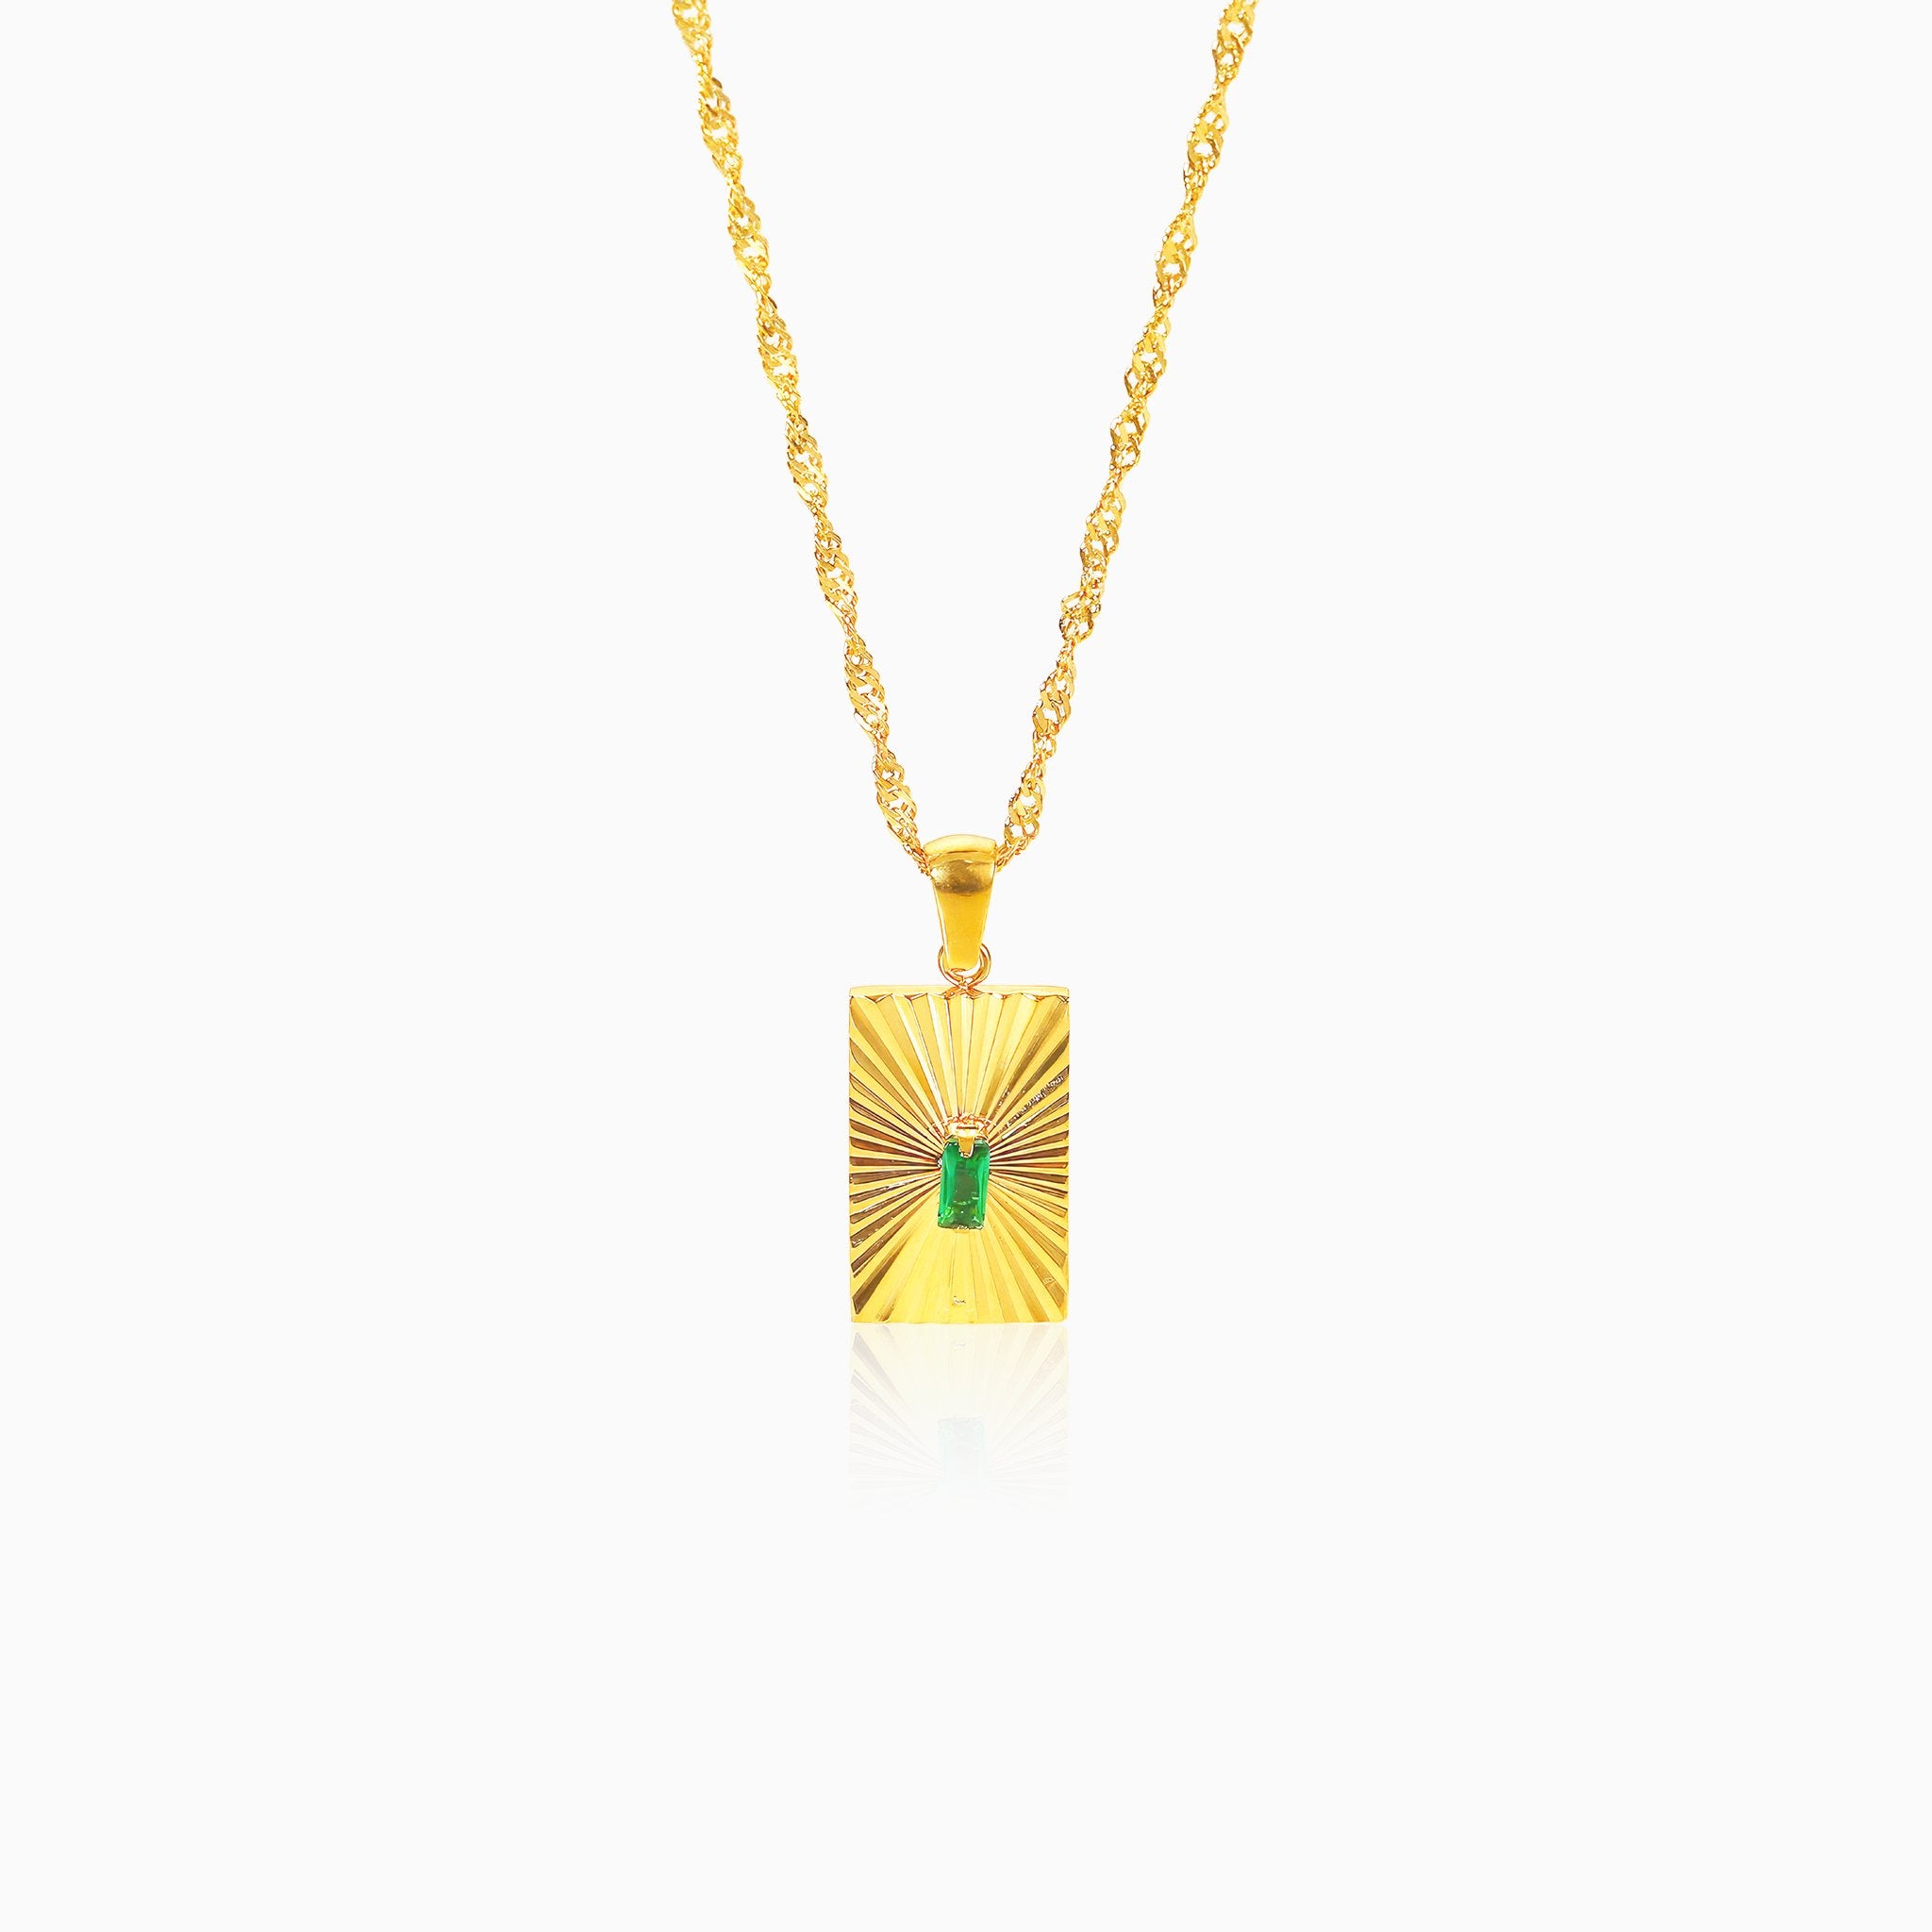 Vintage Emerald Gemstone Pendant Necklace - Nobbier - Necklace - 18K Gold And Titanium PVD Coated Jewelry